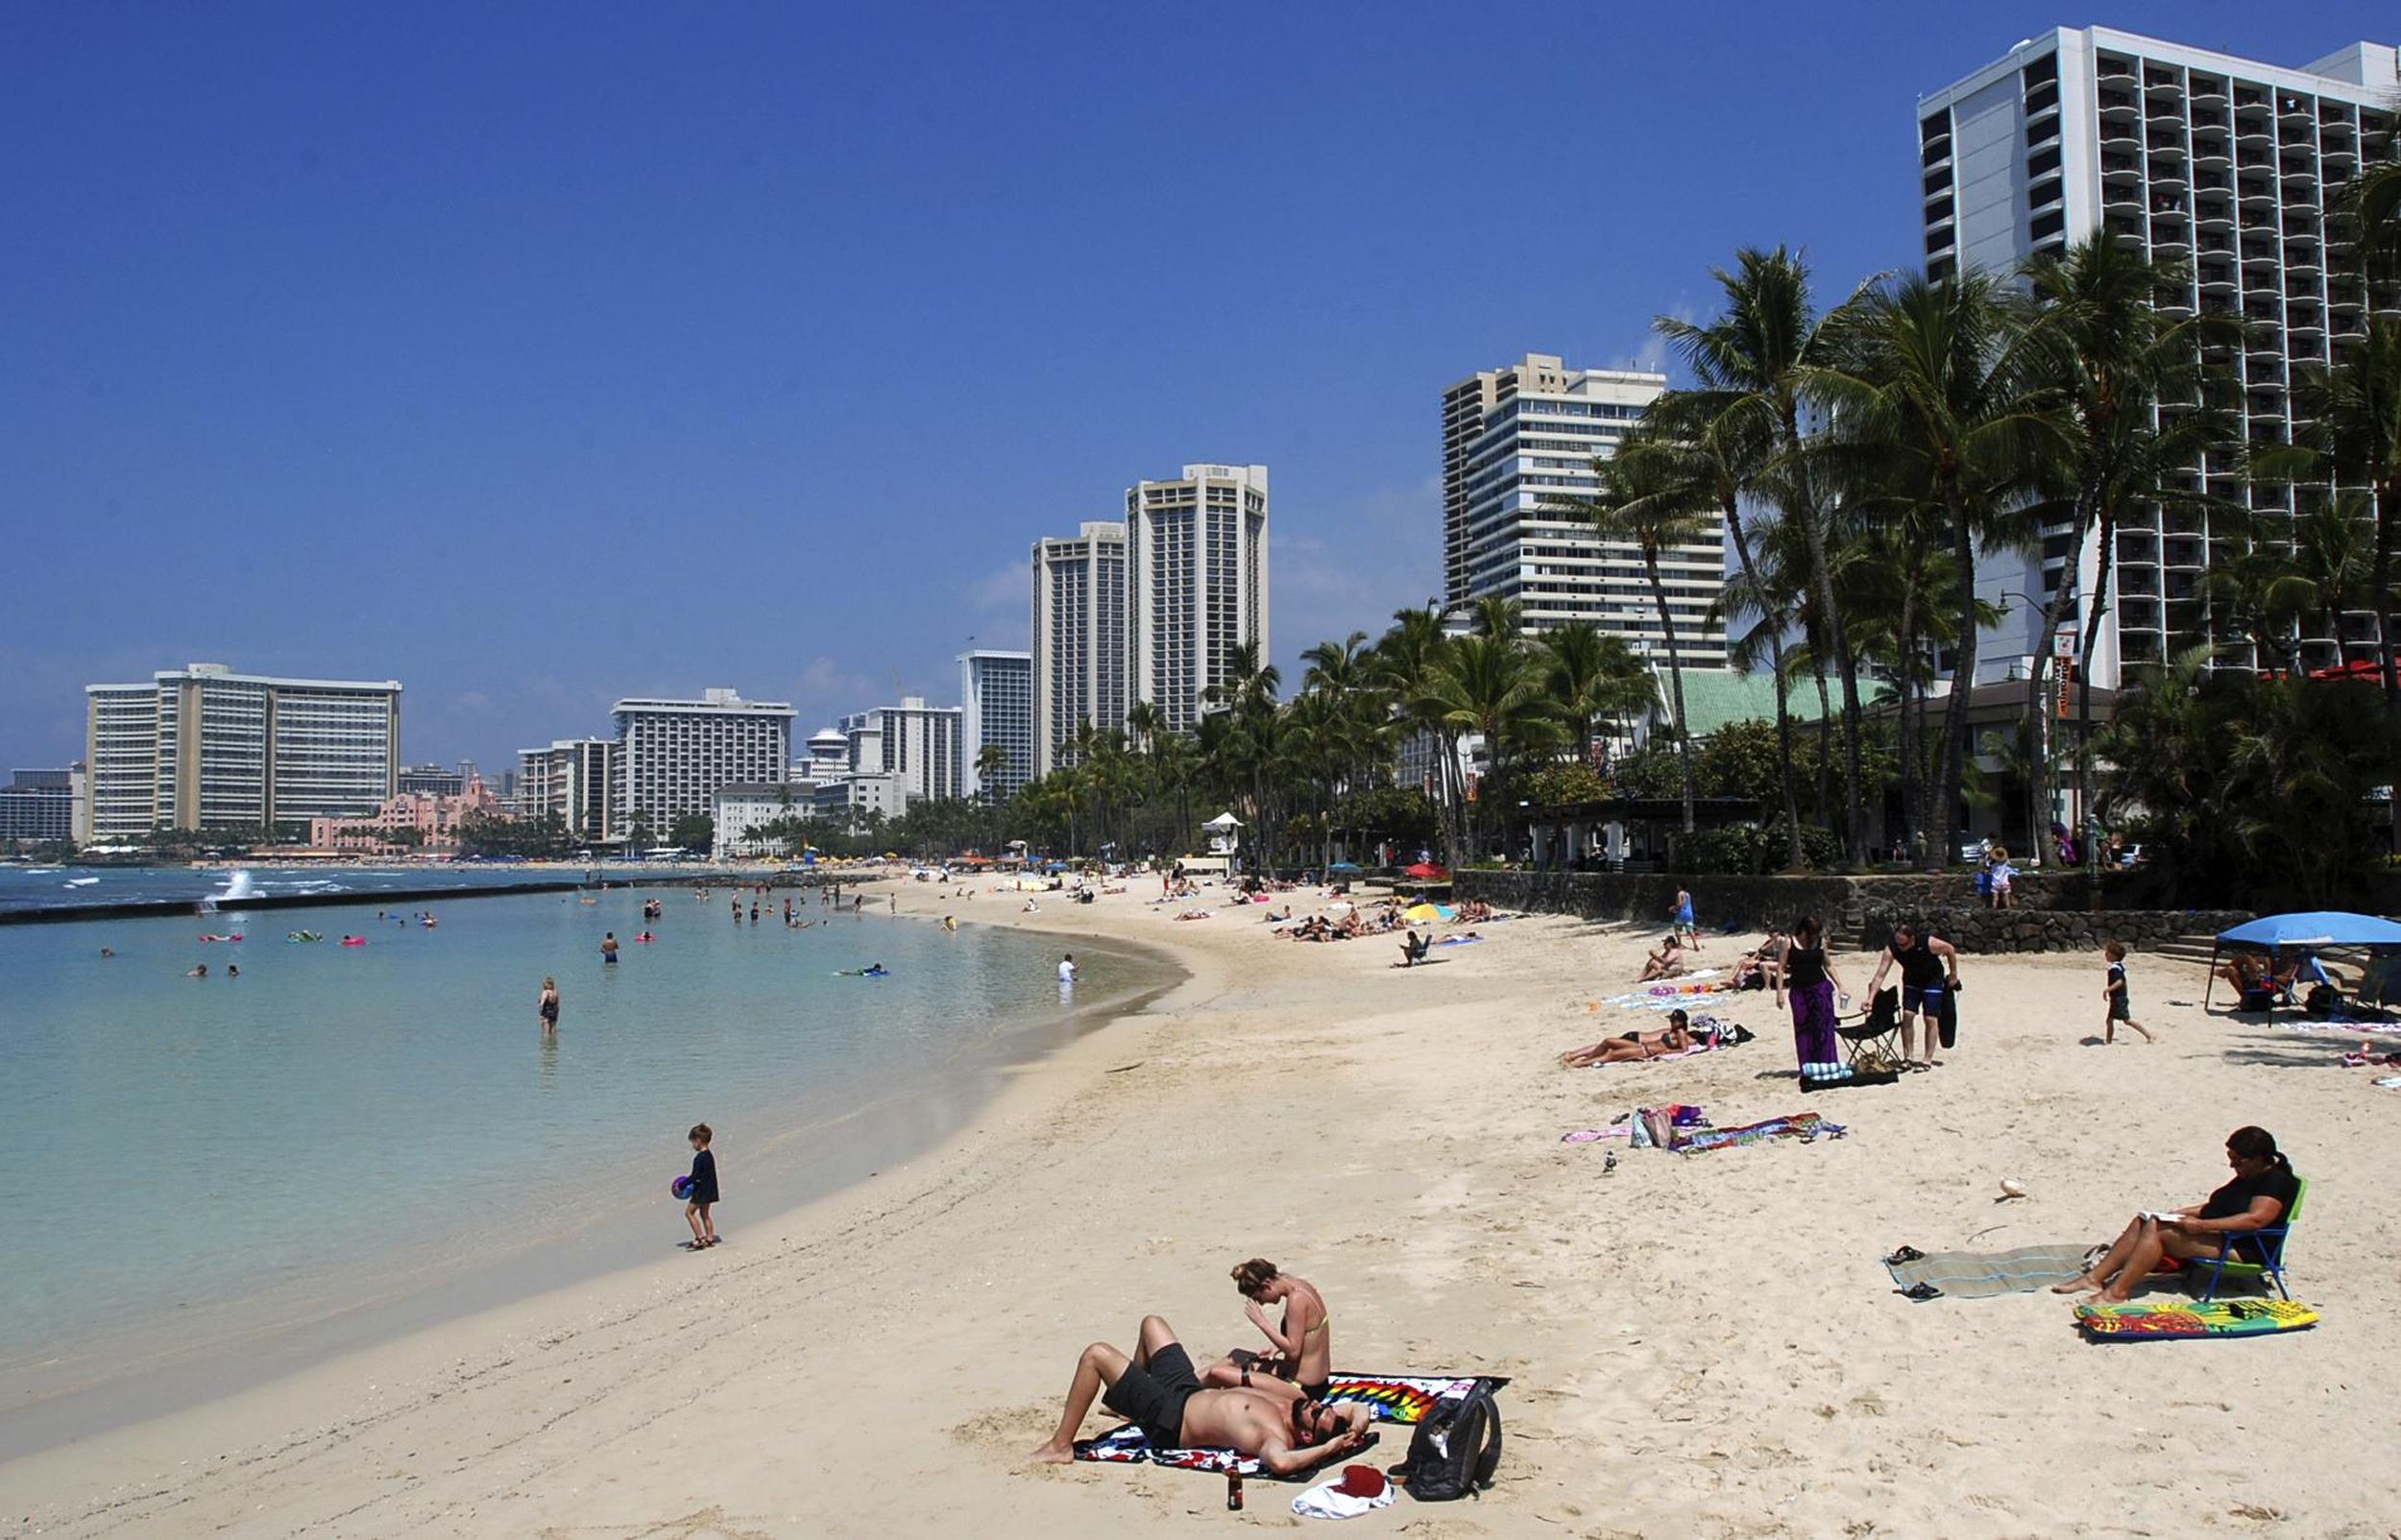 Hawaii poised to ban sale of some sunscreens that harm coral The